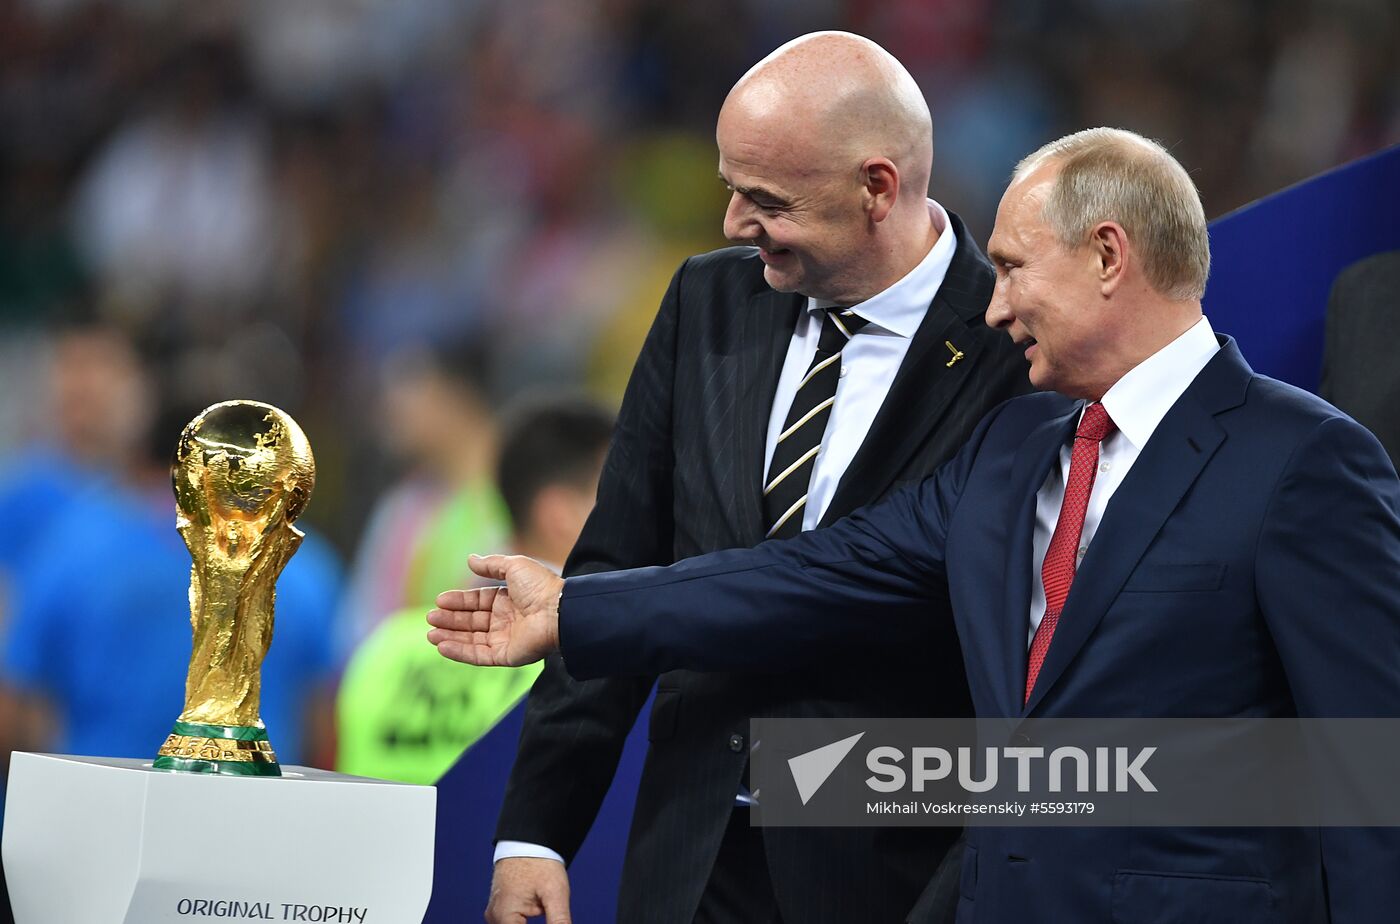  Russia World Cup Trophy